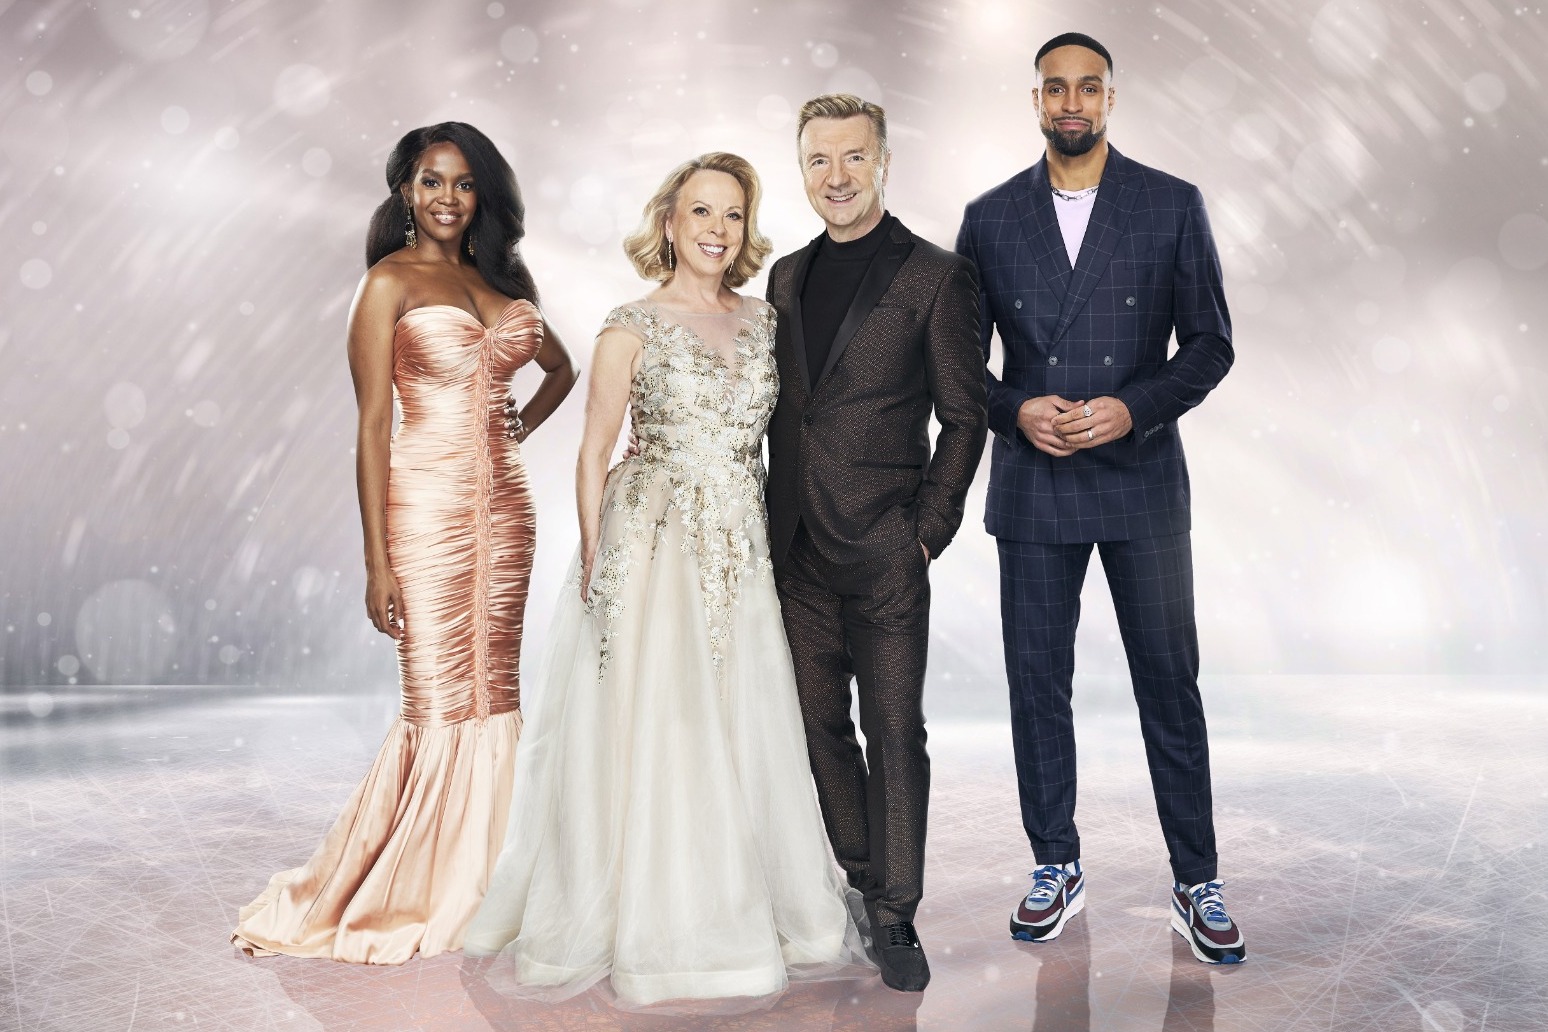 Fifth celebrity eliminated from Dancing On Ice 